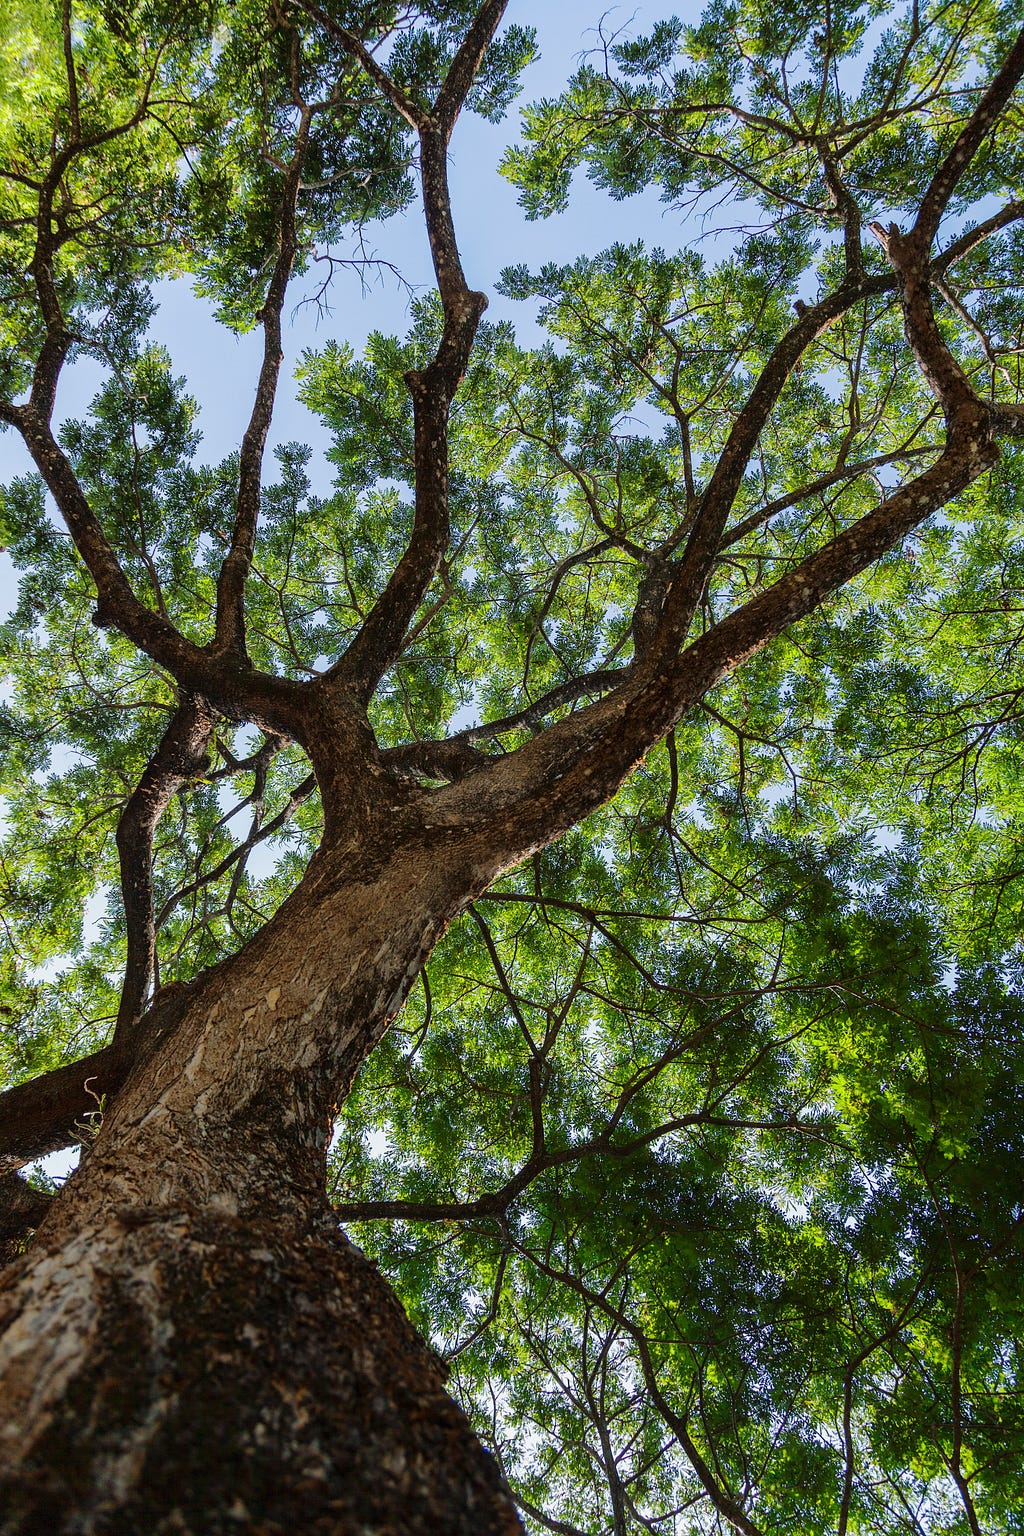 Beautiful old green tree, picture taken from the ground, looking up at it from underneath.